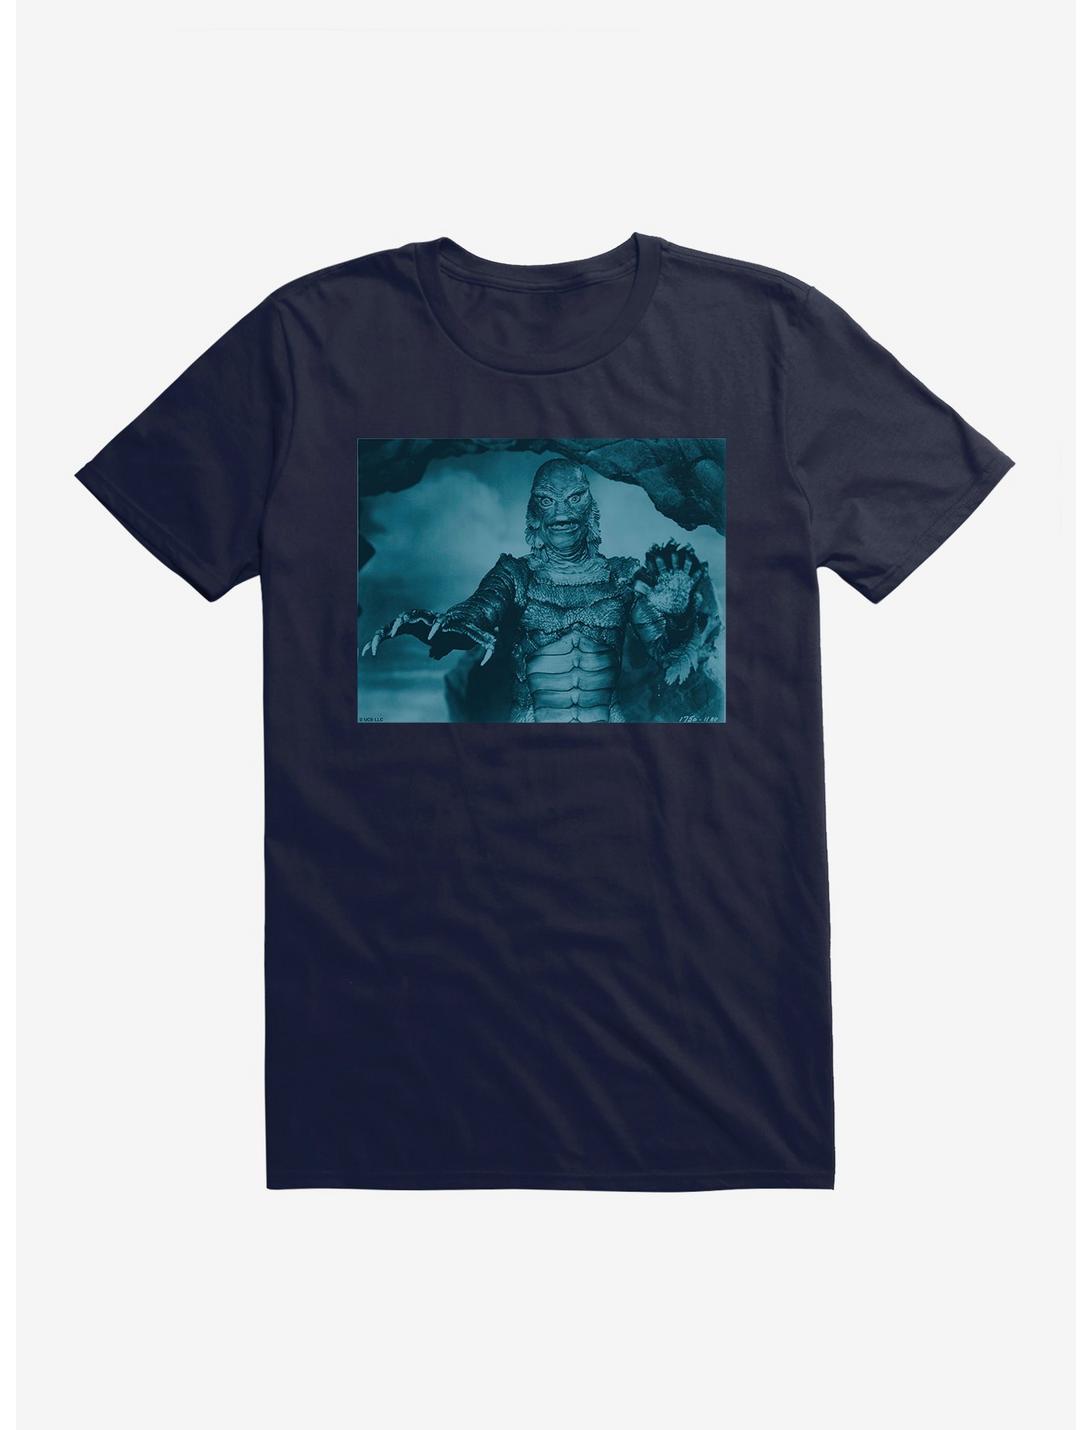 Creature From The Black Lagoon Live Action Blue Scene T-Shirt, NAVY, hi-res